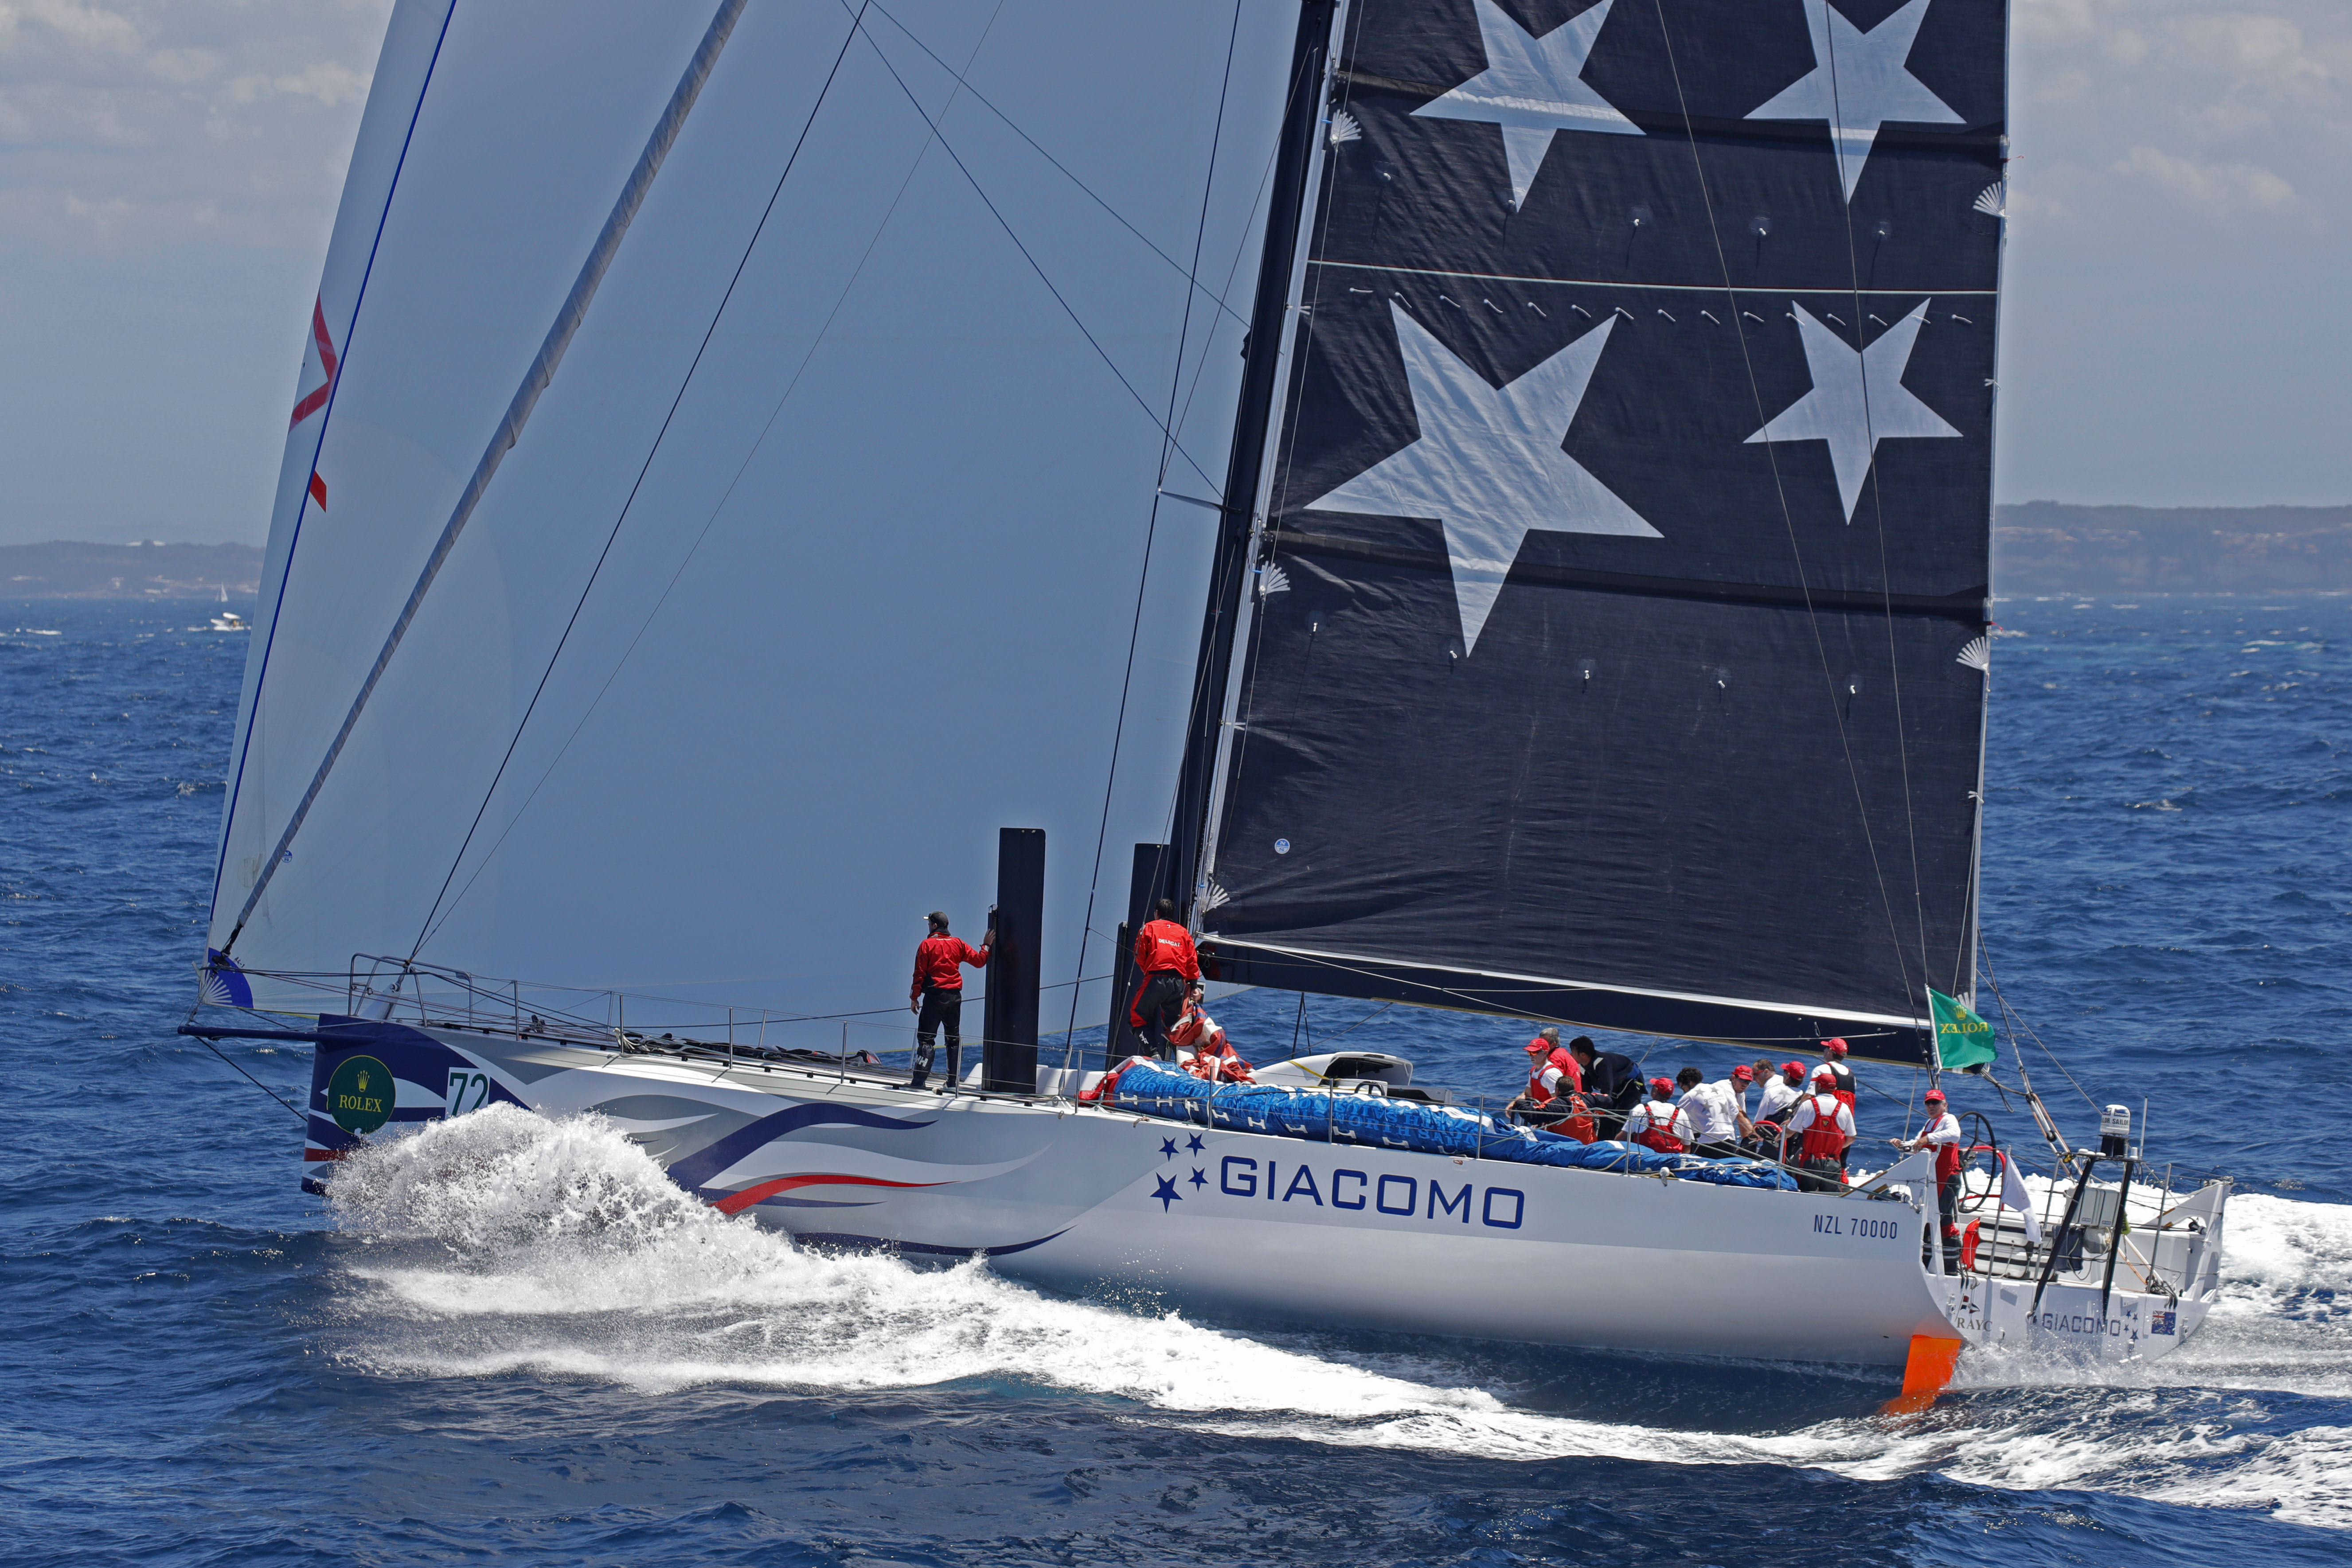 Jim Delegat's GIACOMO, second finisher, and overall winner of the 2016 Rolex Sydney Hobart